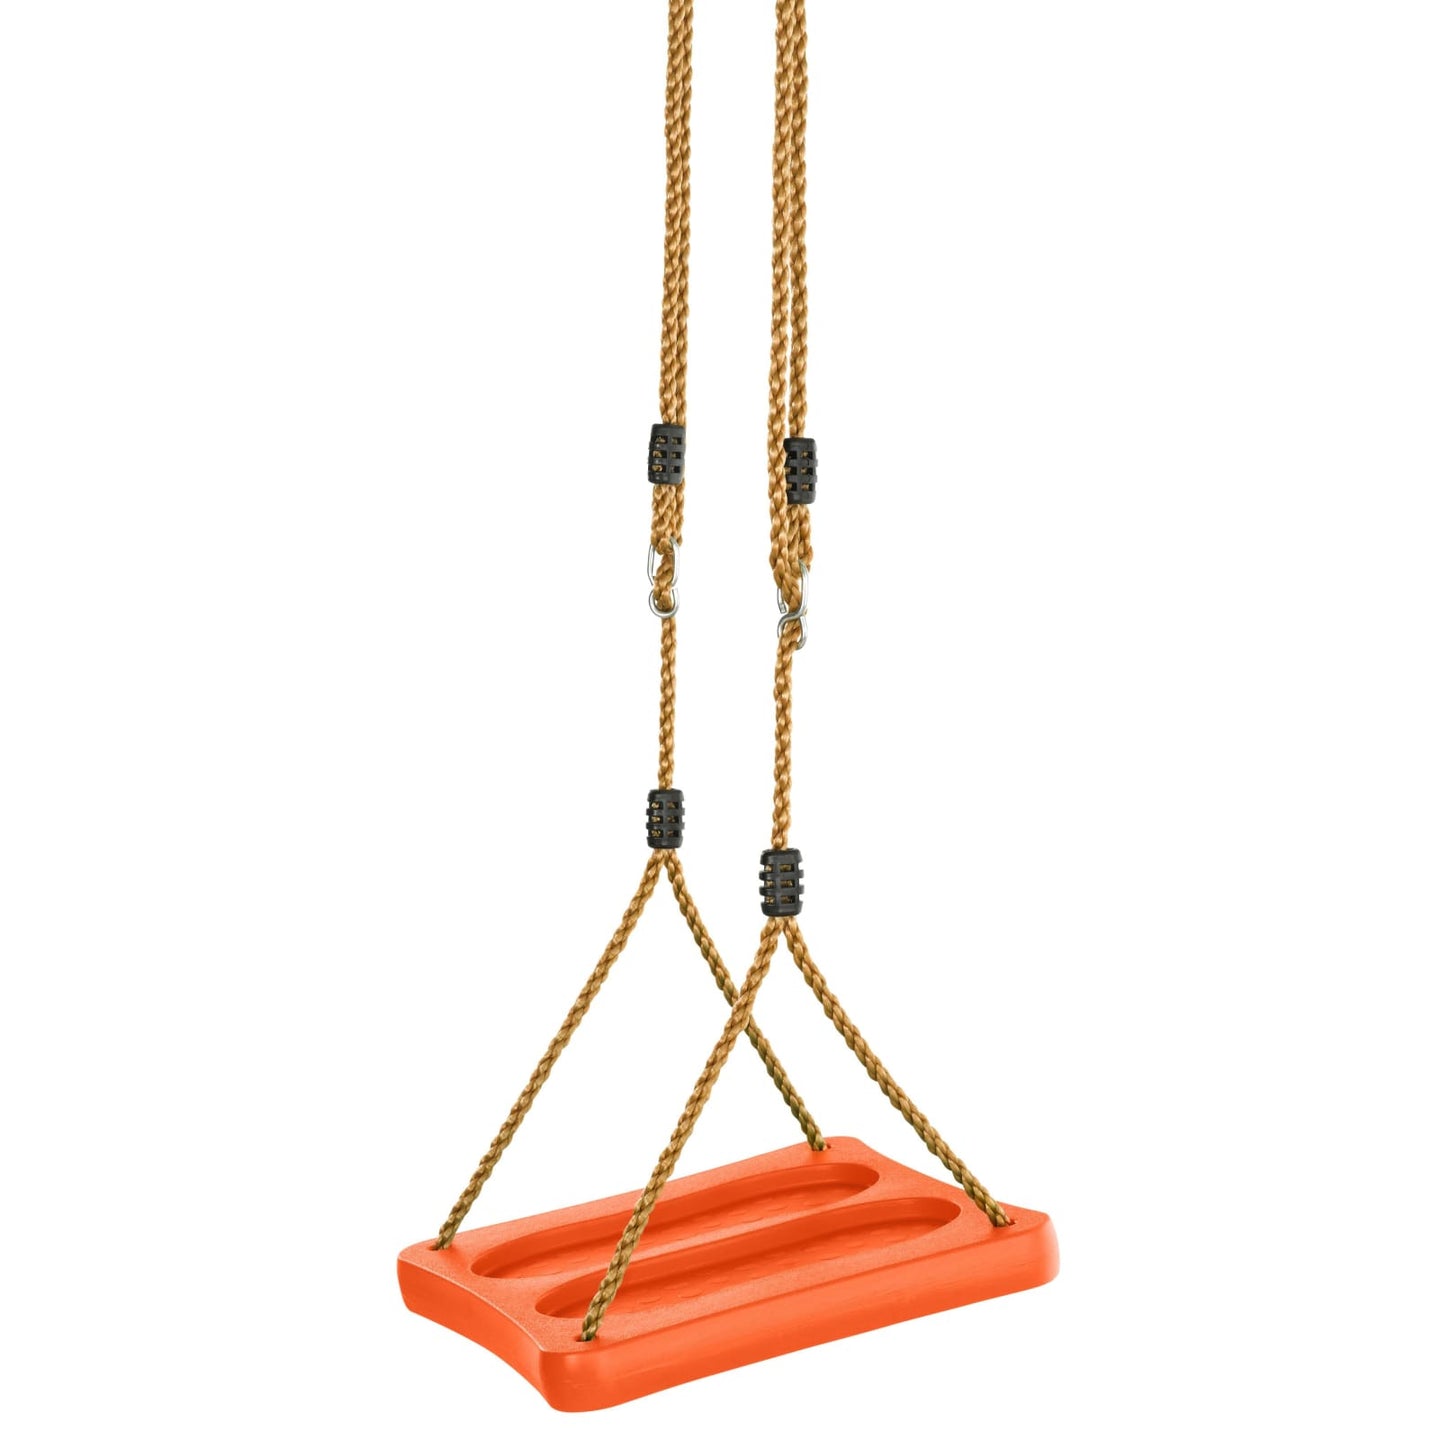 Swingan - One Of A Kind Standing Swing With Adjustable Ropes - Orange - Swssr-Or - Swings & Accessories